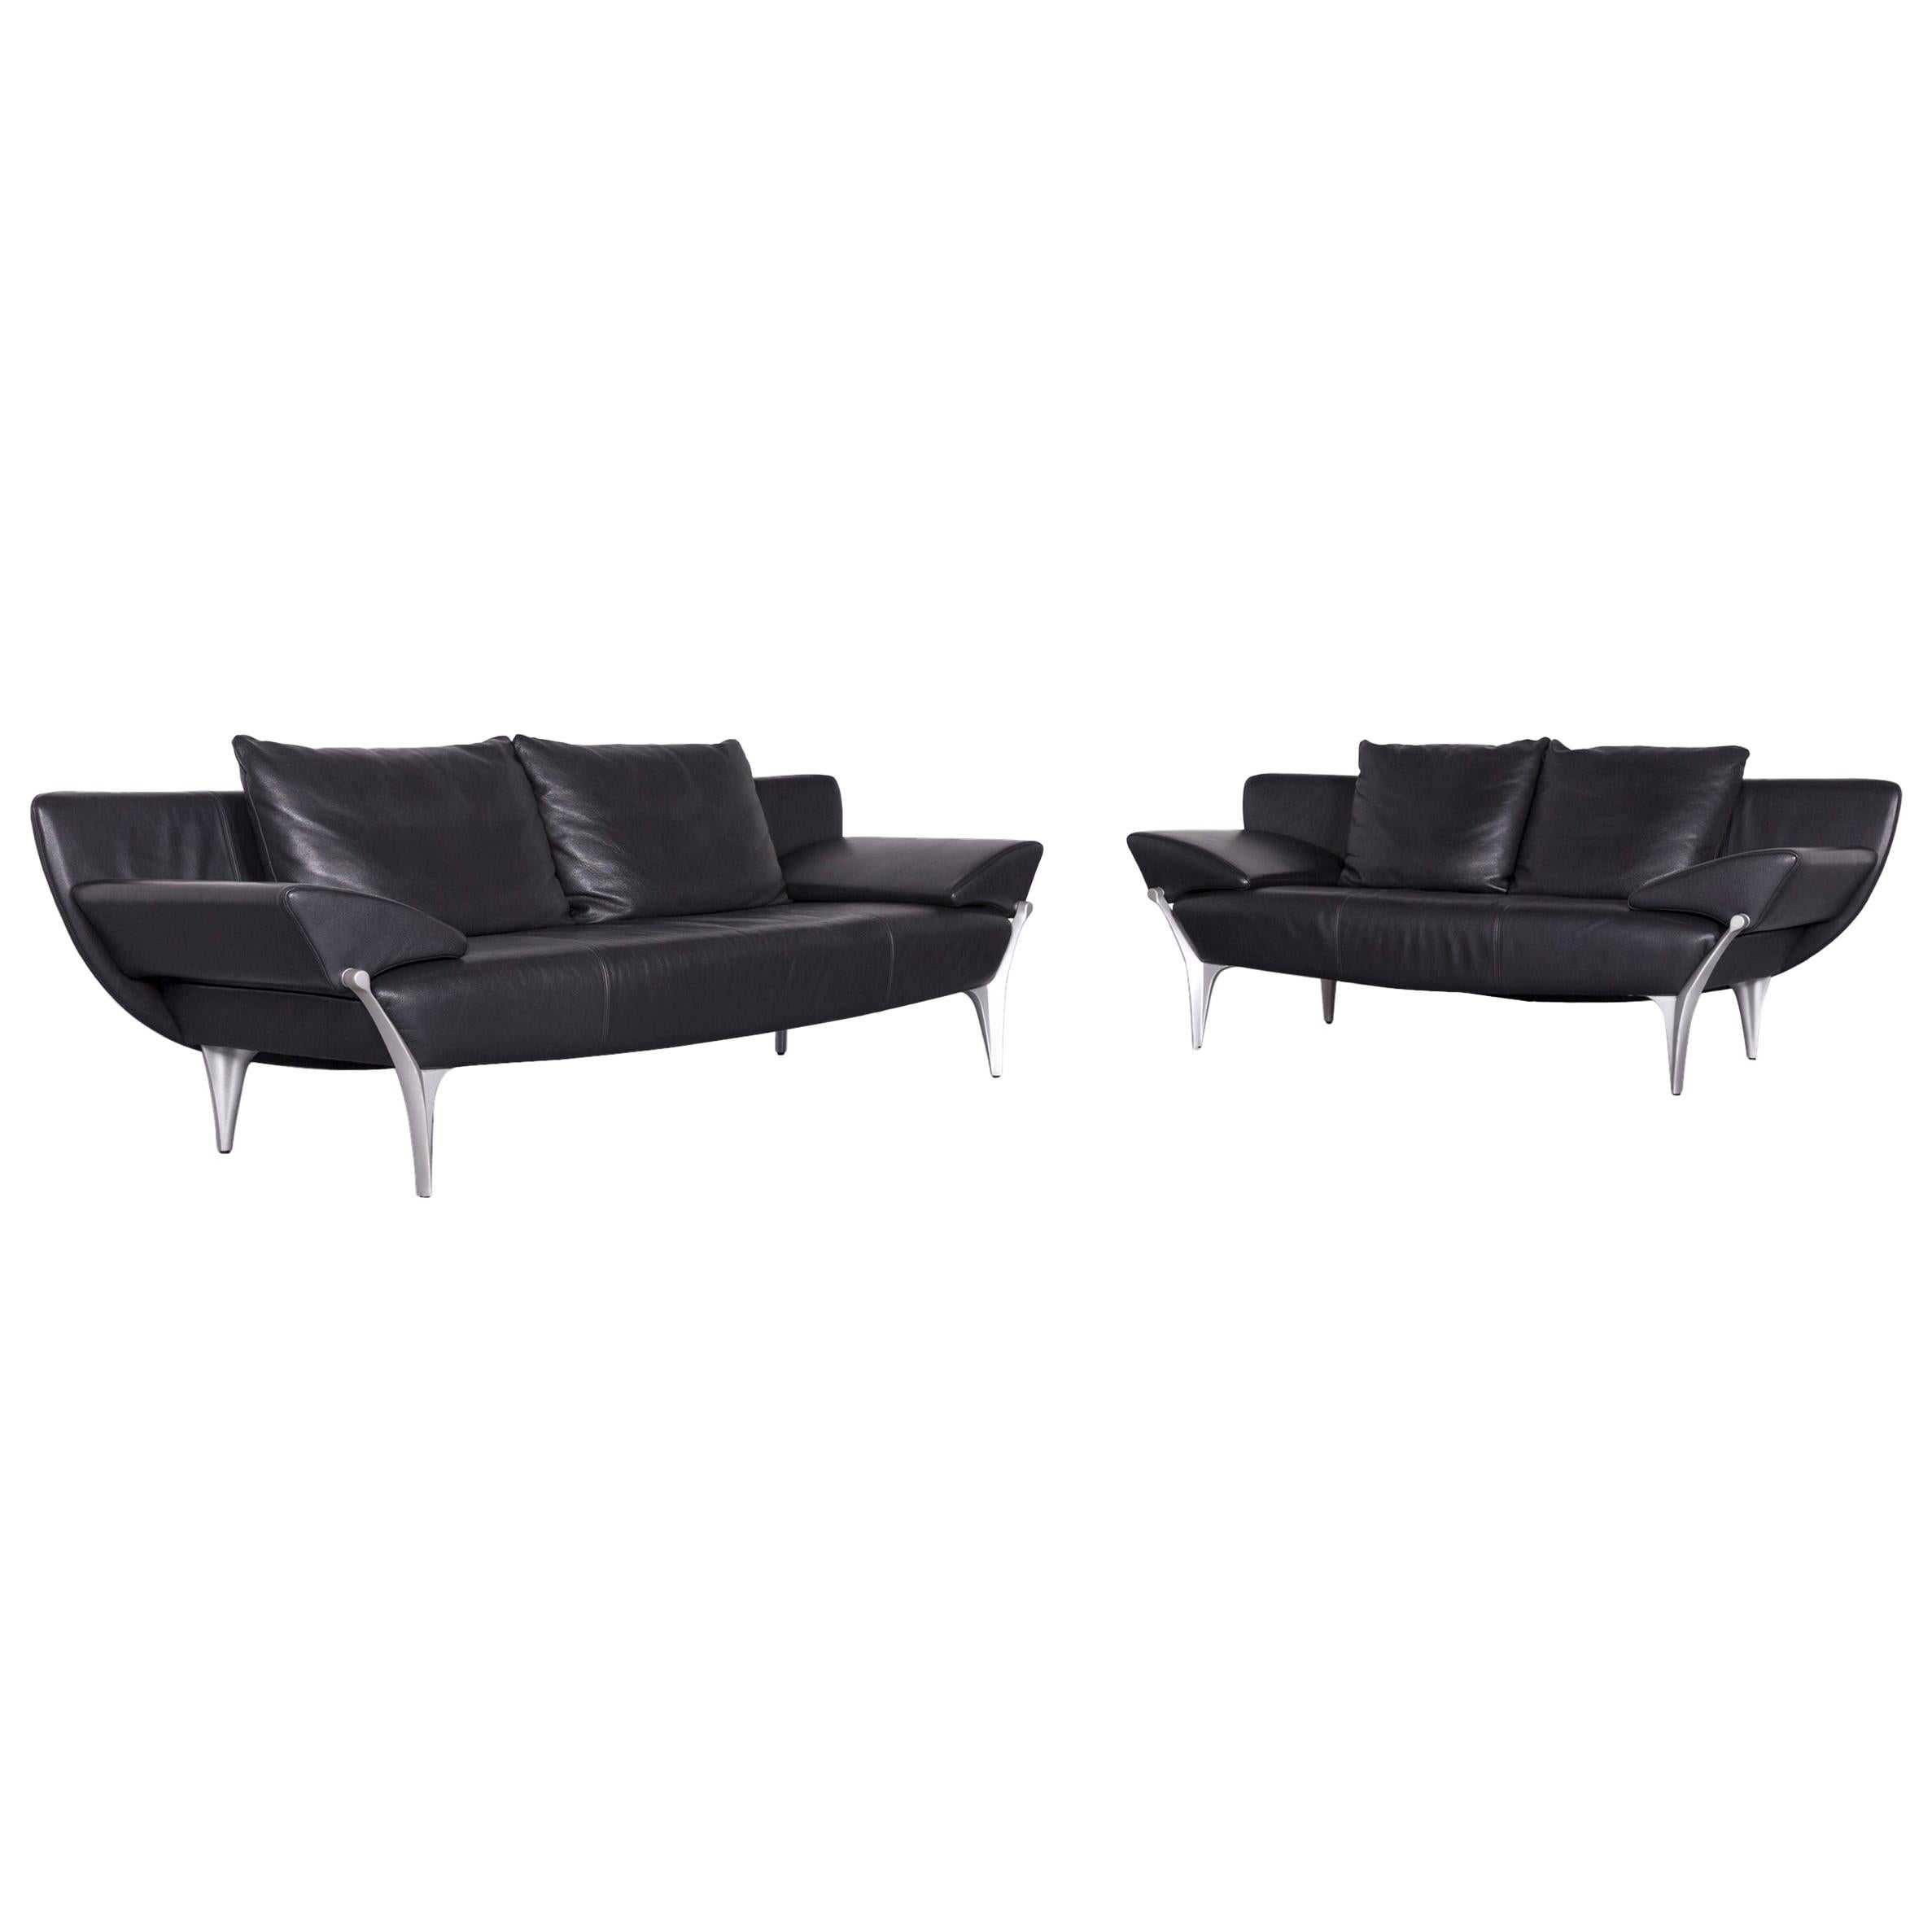 Rolf Benz 1600 Designer Leather Sofa Set Black Two-Seat Three-Seat Couch